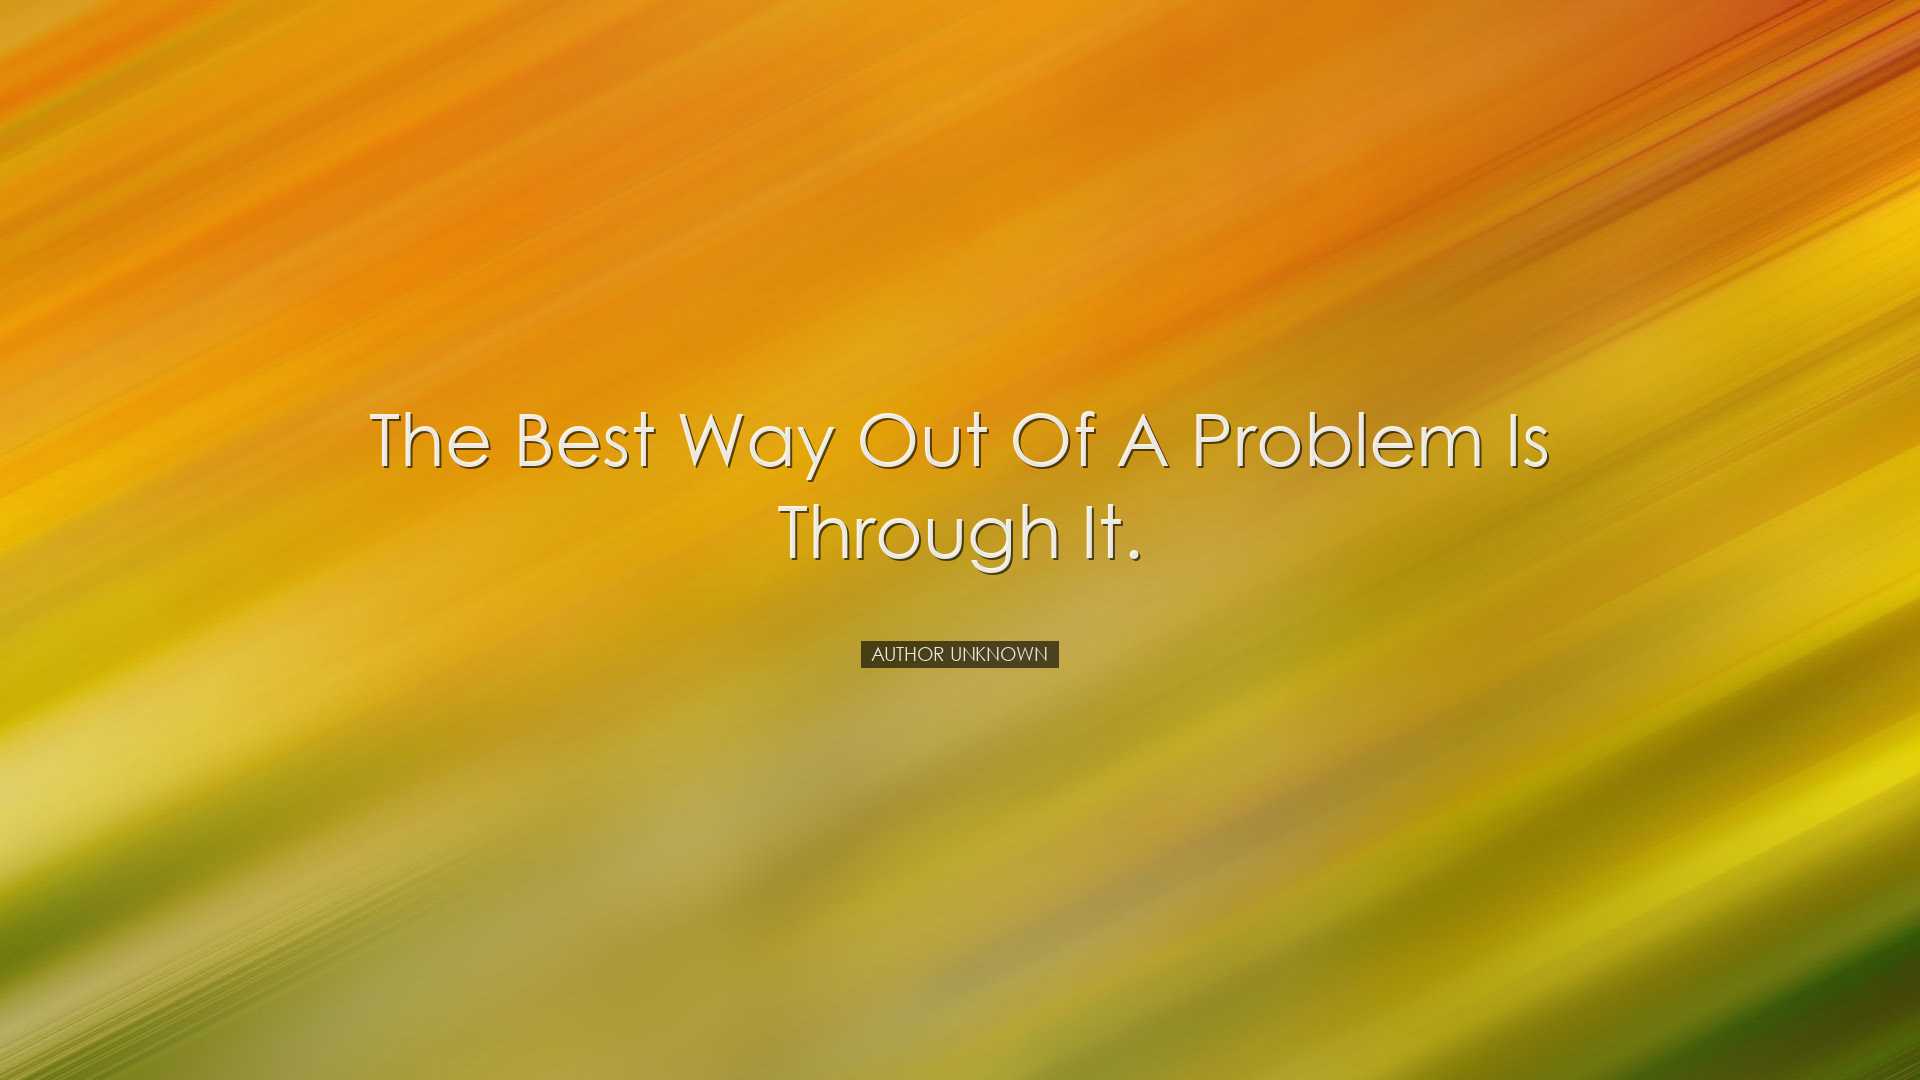 The best way out of a problem is through it. - Author Unknown